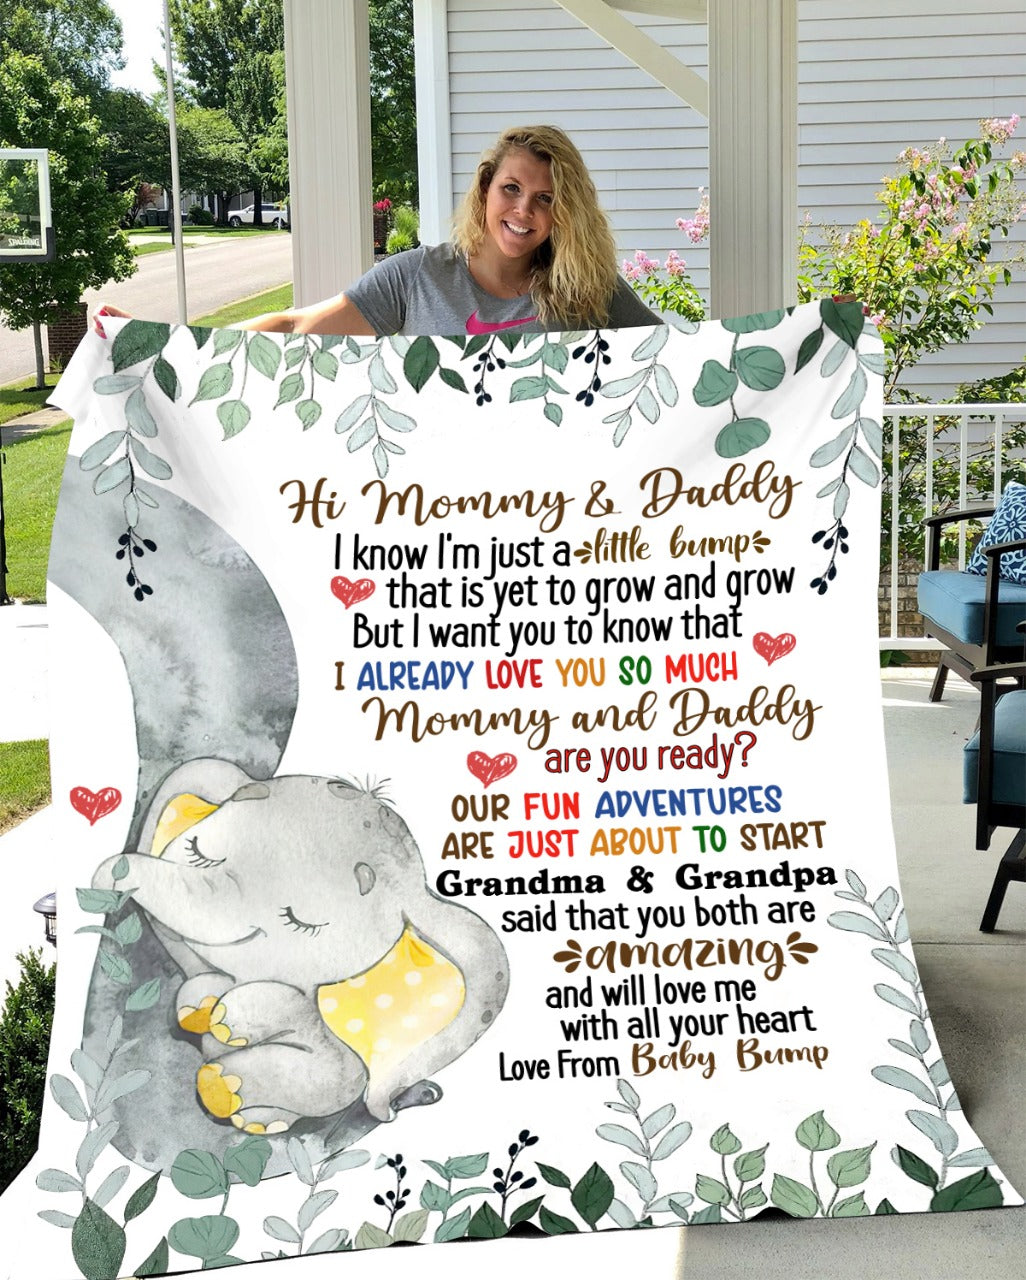 50% OFF SALE - HI MOMMY & DADDY  - I'M JUST A LITTLE BUMP - LOVE FROM BABY BUMP - COZY FLEECE/PREMIUM SHERPA BLANKET